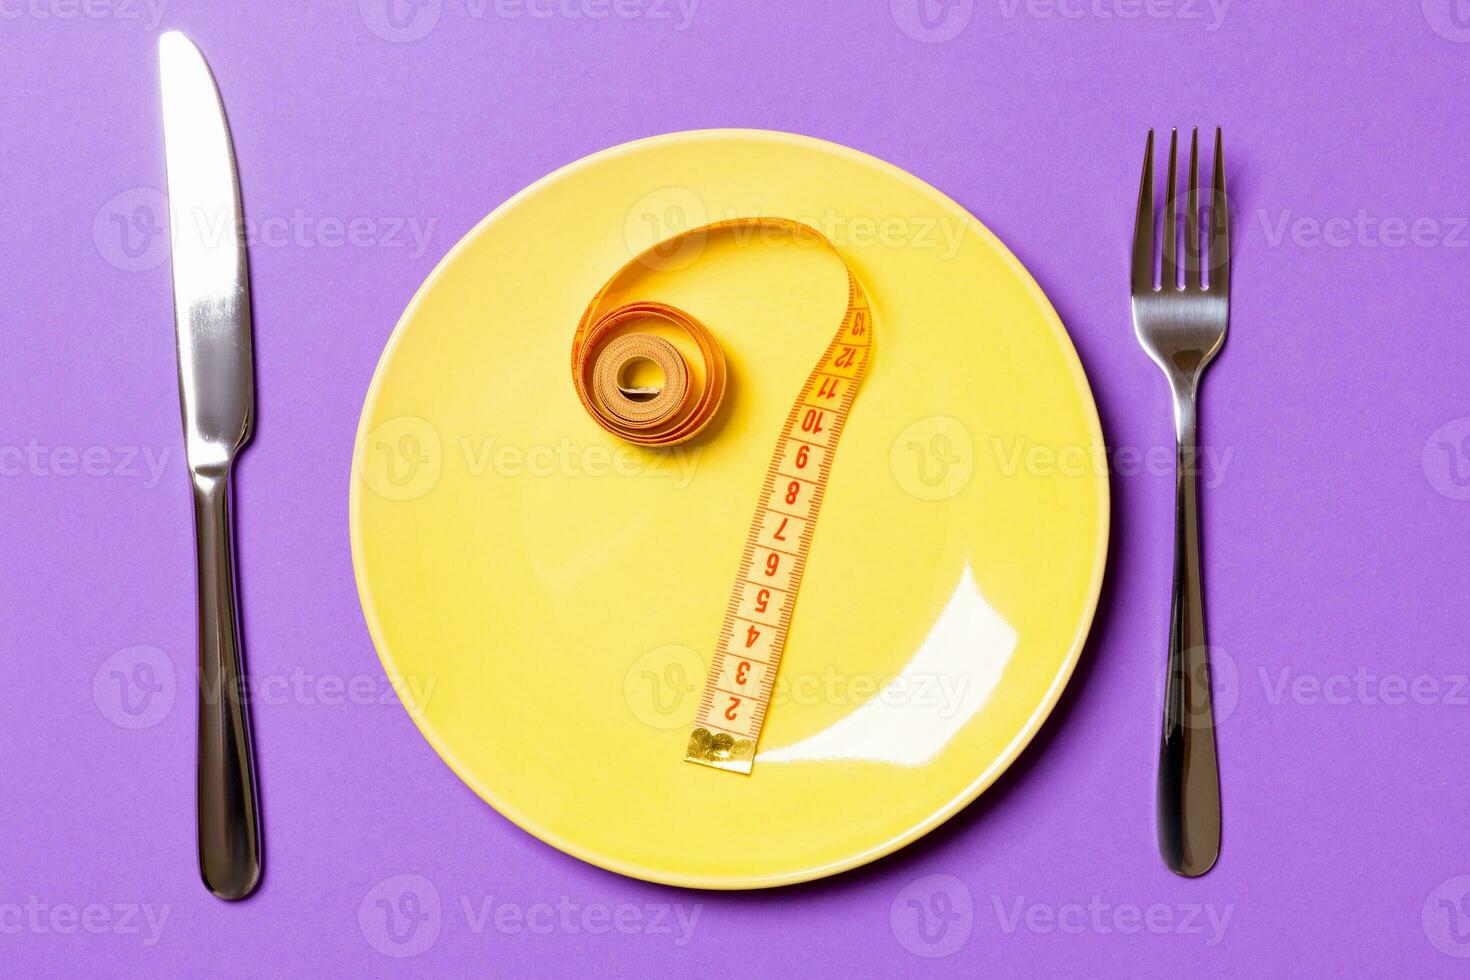 Question mark made of measuring tape on round plate on purple background. Top view of hesitation and diet concept photo